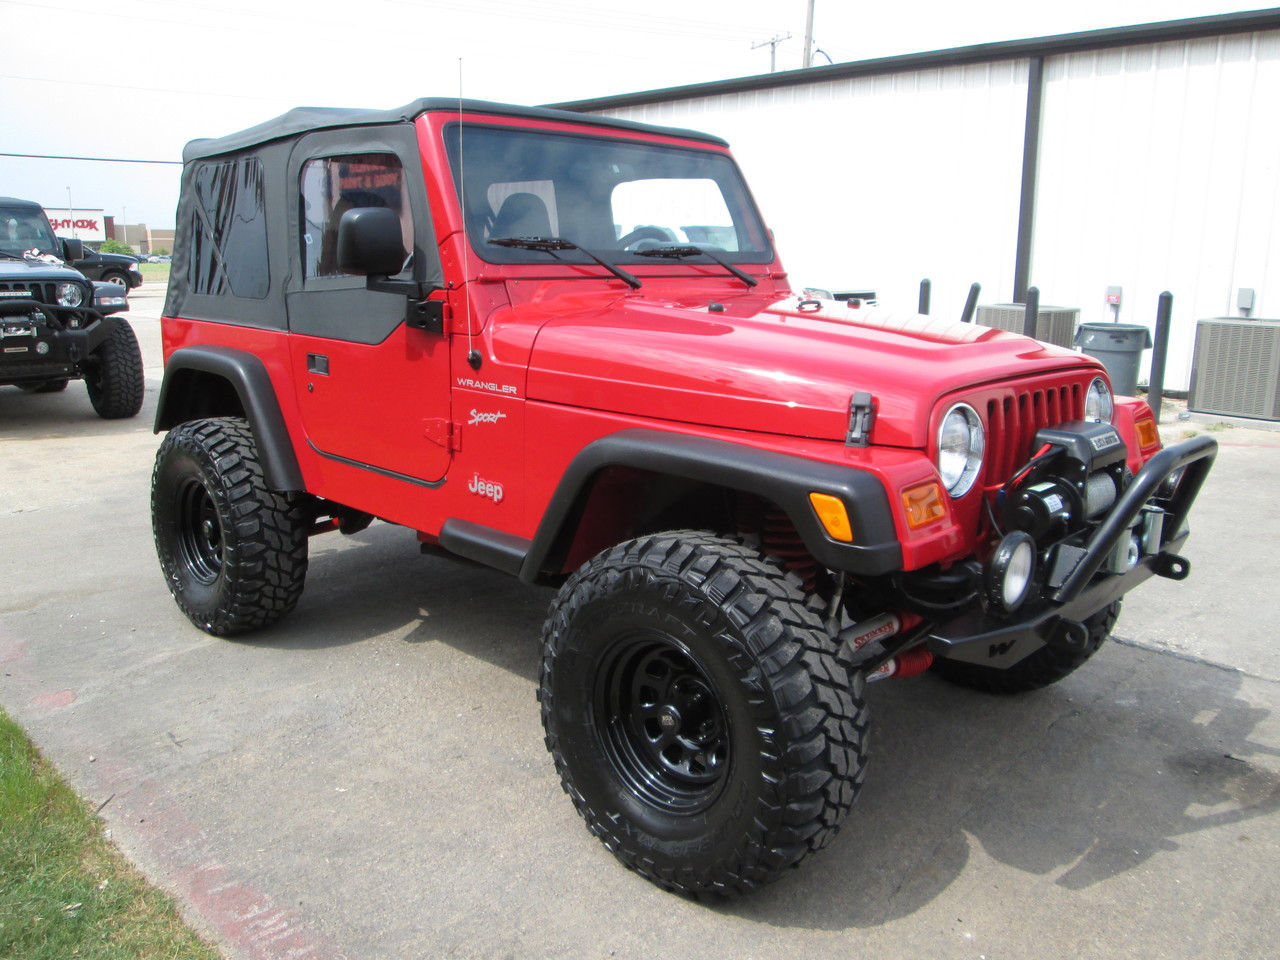 SOLD 2002 Jeep TJ Wrangler Sport Edition Super Low Miles! Stock# 728114